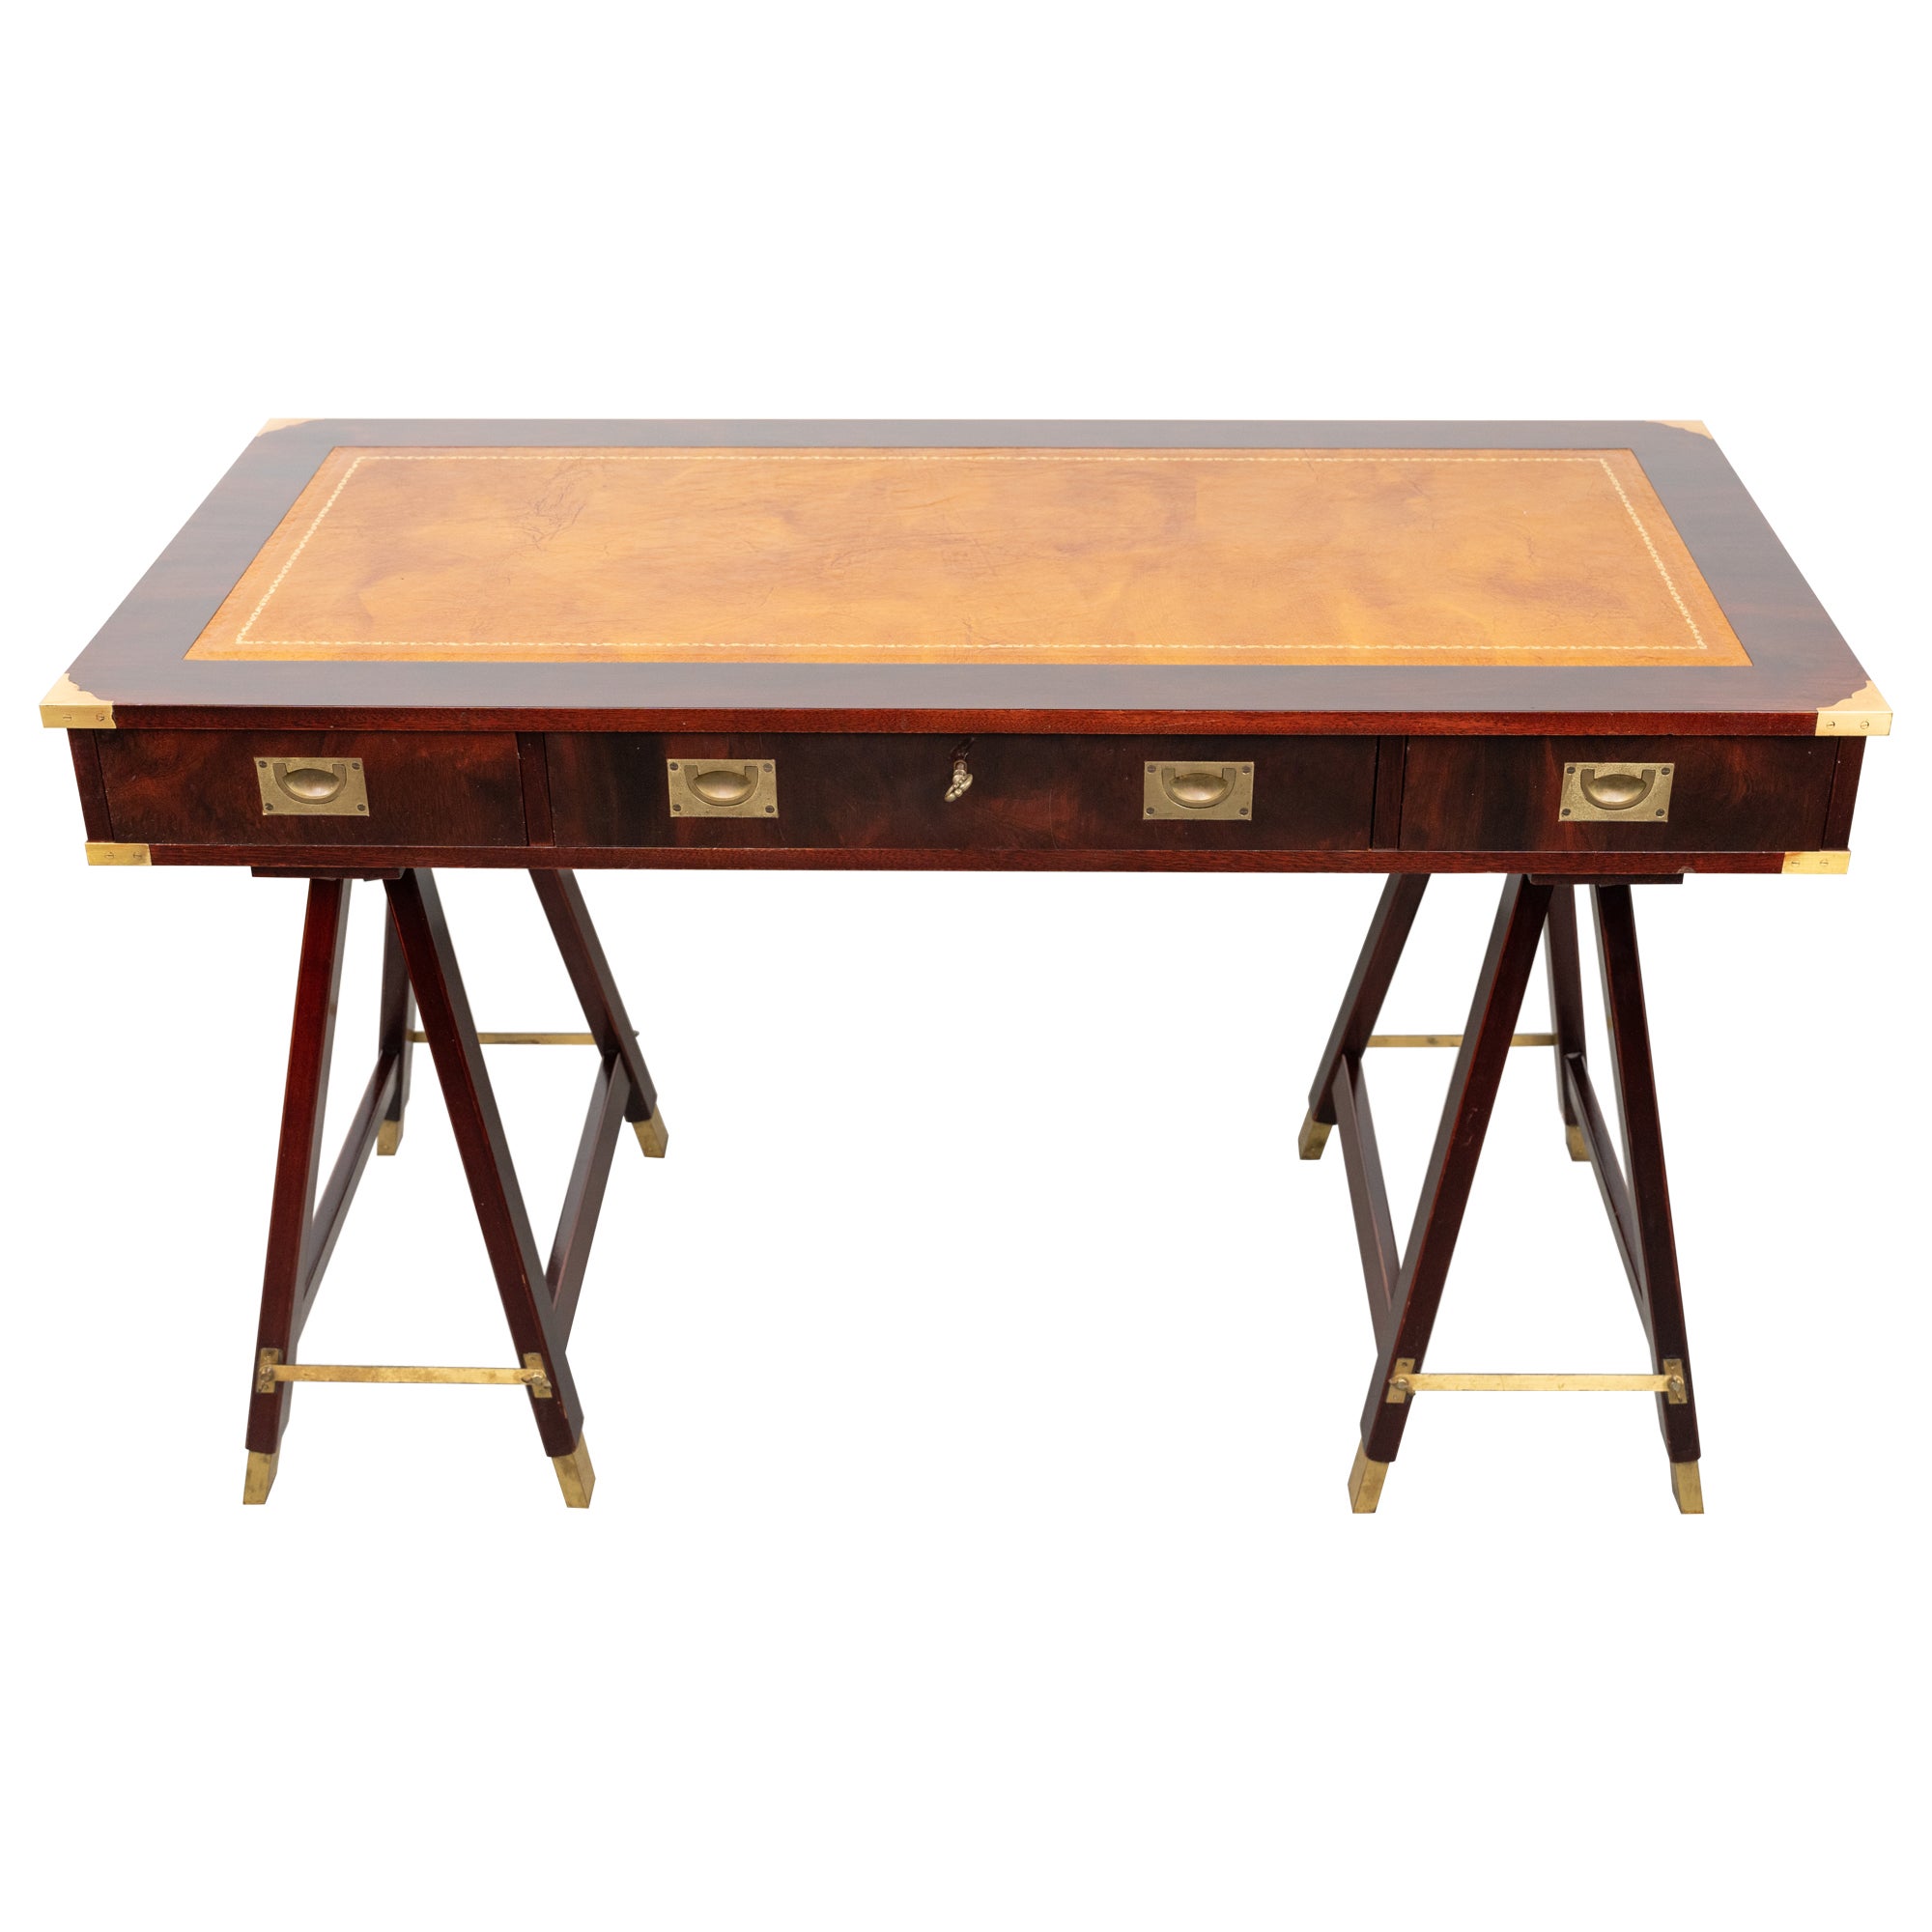 Military Campaign Style Desk Table in Wood, Brass and Leather, Italy 1960s For Sale